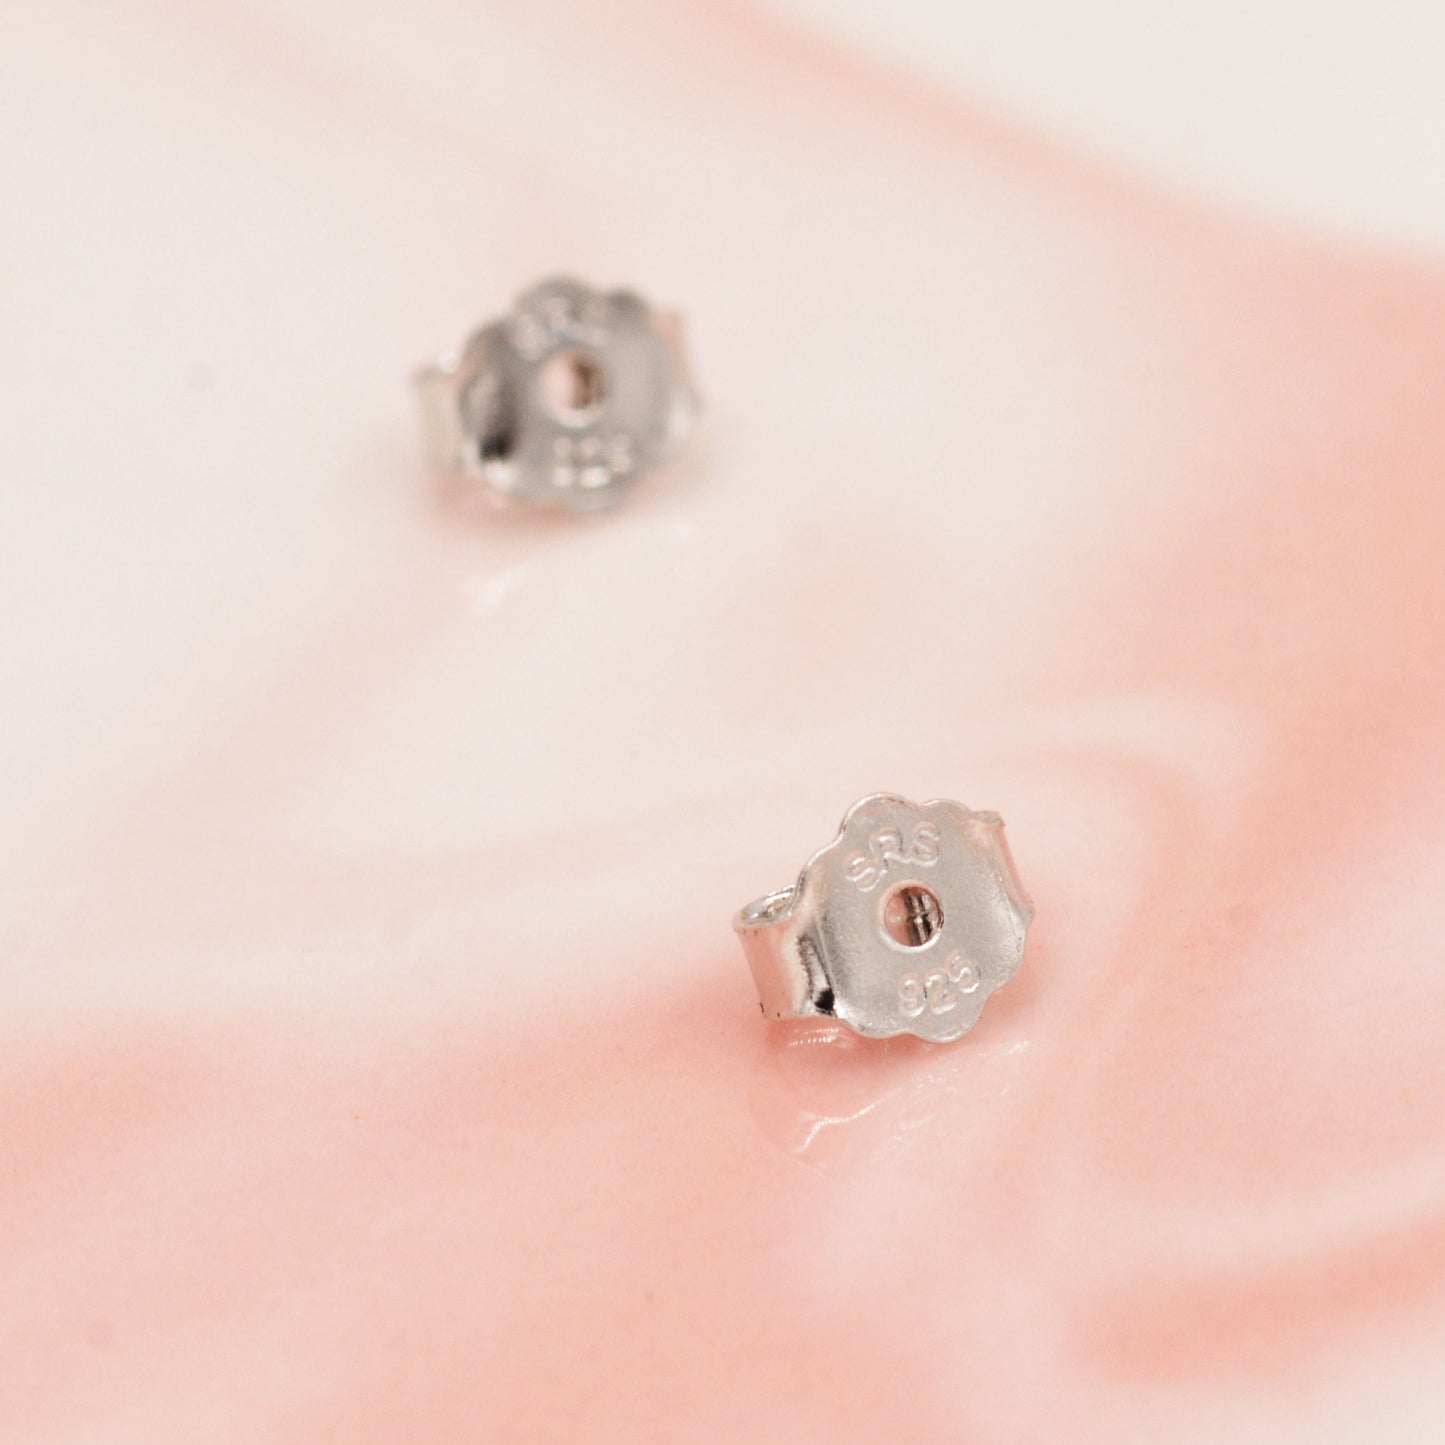 Open Circle CZ Stud Earrings in Sterling Silver - Gold, Rose Gold and Silver Petite Stud Earrings - Sparkling Crystal Circle Stud